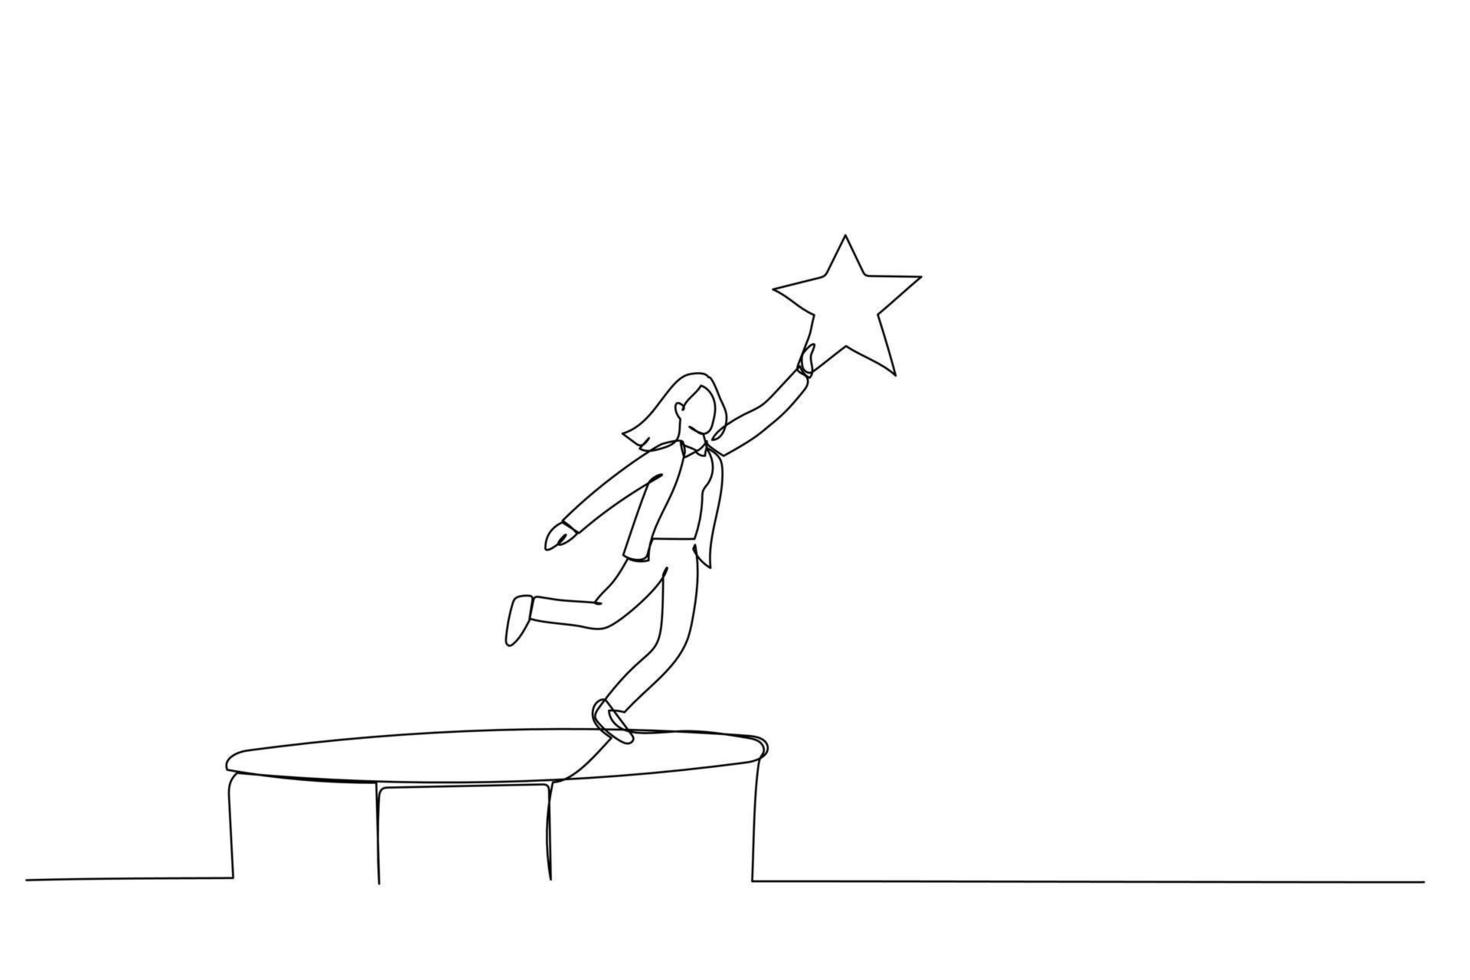 Cartoon of businesswoman bounce on trampoline jump flying high to grab star. Metaphor for achievement. Single line art style vector